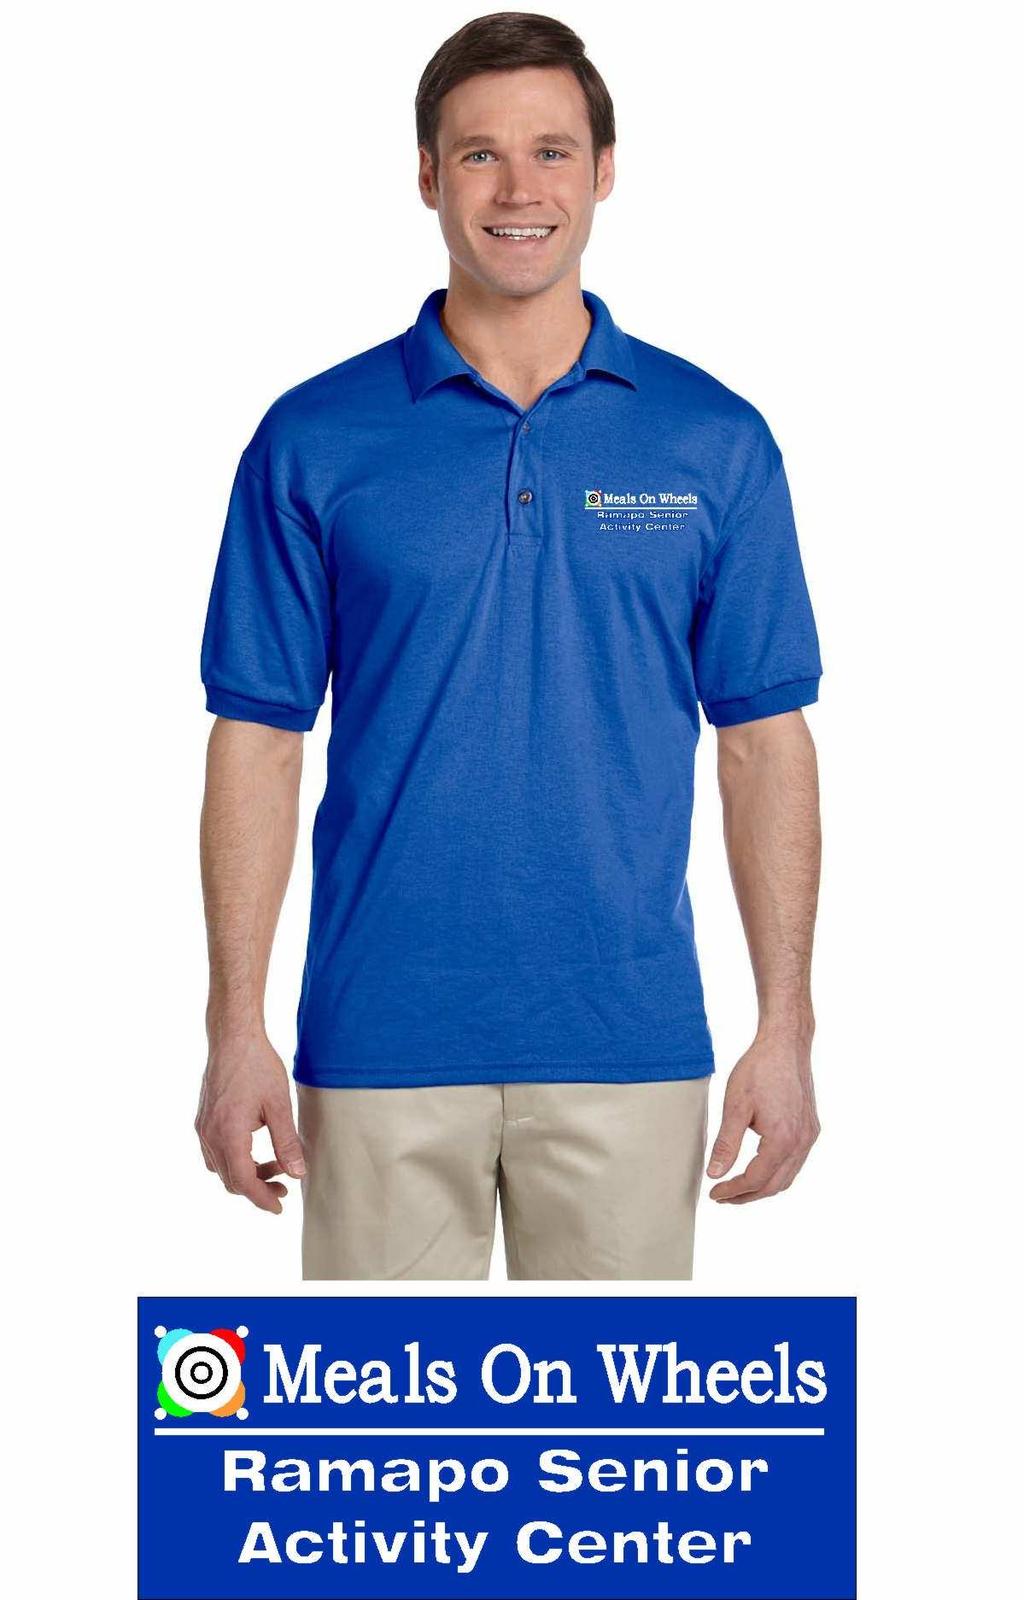 Show pride in your center! Order your Ramapo polo today. Please place your order by Friday, February 15.